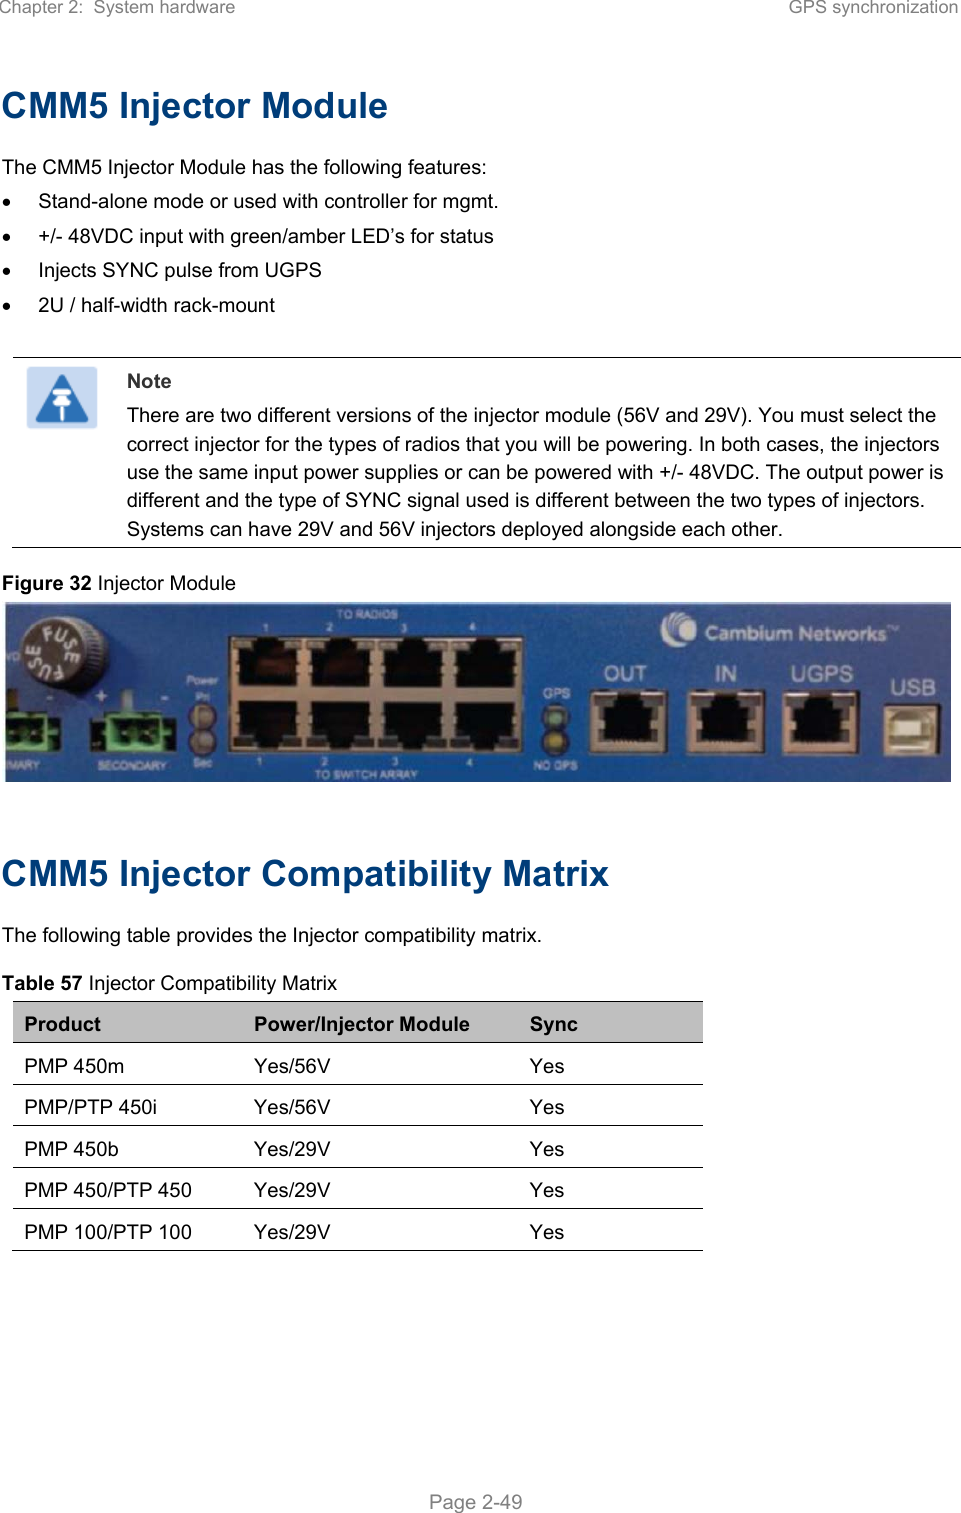 Chapter 2:  System hardware  GPS synchronization   Page 2-49 CMM5 Injector Module The CMM5 Injector Module has the following features:   Stand-alone mode or used with controller for mgmt.   +/- 48VDC input with green/amber LED’s for status   Injects SYNC pulse from UGPS   2U / half-width rack-mount   Note There are two different versions of the injector module (56V and 29V). You must select the correct injector for the types of radios that you will be powering. In both cases, the injectors use the same input power supplies or can be powered with +/- 48VDC. The output power is different and the type of SYNC signal used is different between the two types of injectors. Systems can have 29V and 56V injectors deployed alongside each other. Figure 32 Injector Module   CMM5 Injector Compatibility Matrix The following table provides the Injector compatibility matrix. Table 57 Injector Compatibility Matrix Product  Power/Injector Module  Sync PMP 450m  Yes/56V  Yes PMP/PTP 450i  Yes/56V  Yes PMP 450b  Yes/29V  Yes PMP 450/PTP 450  Yes/29V  Yes PMP 100/PTP 100  Yes/29V  Yes  